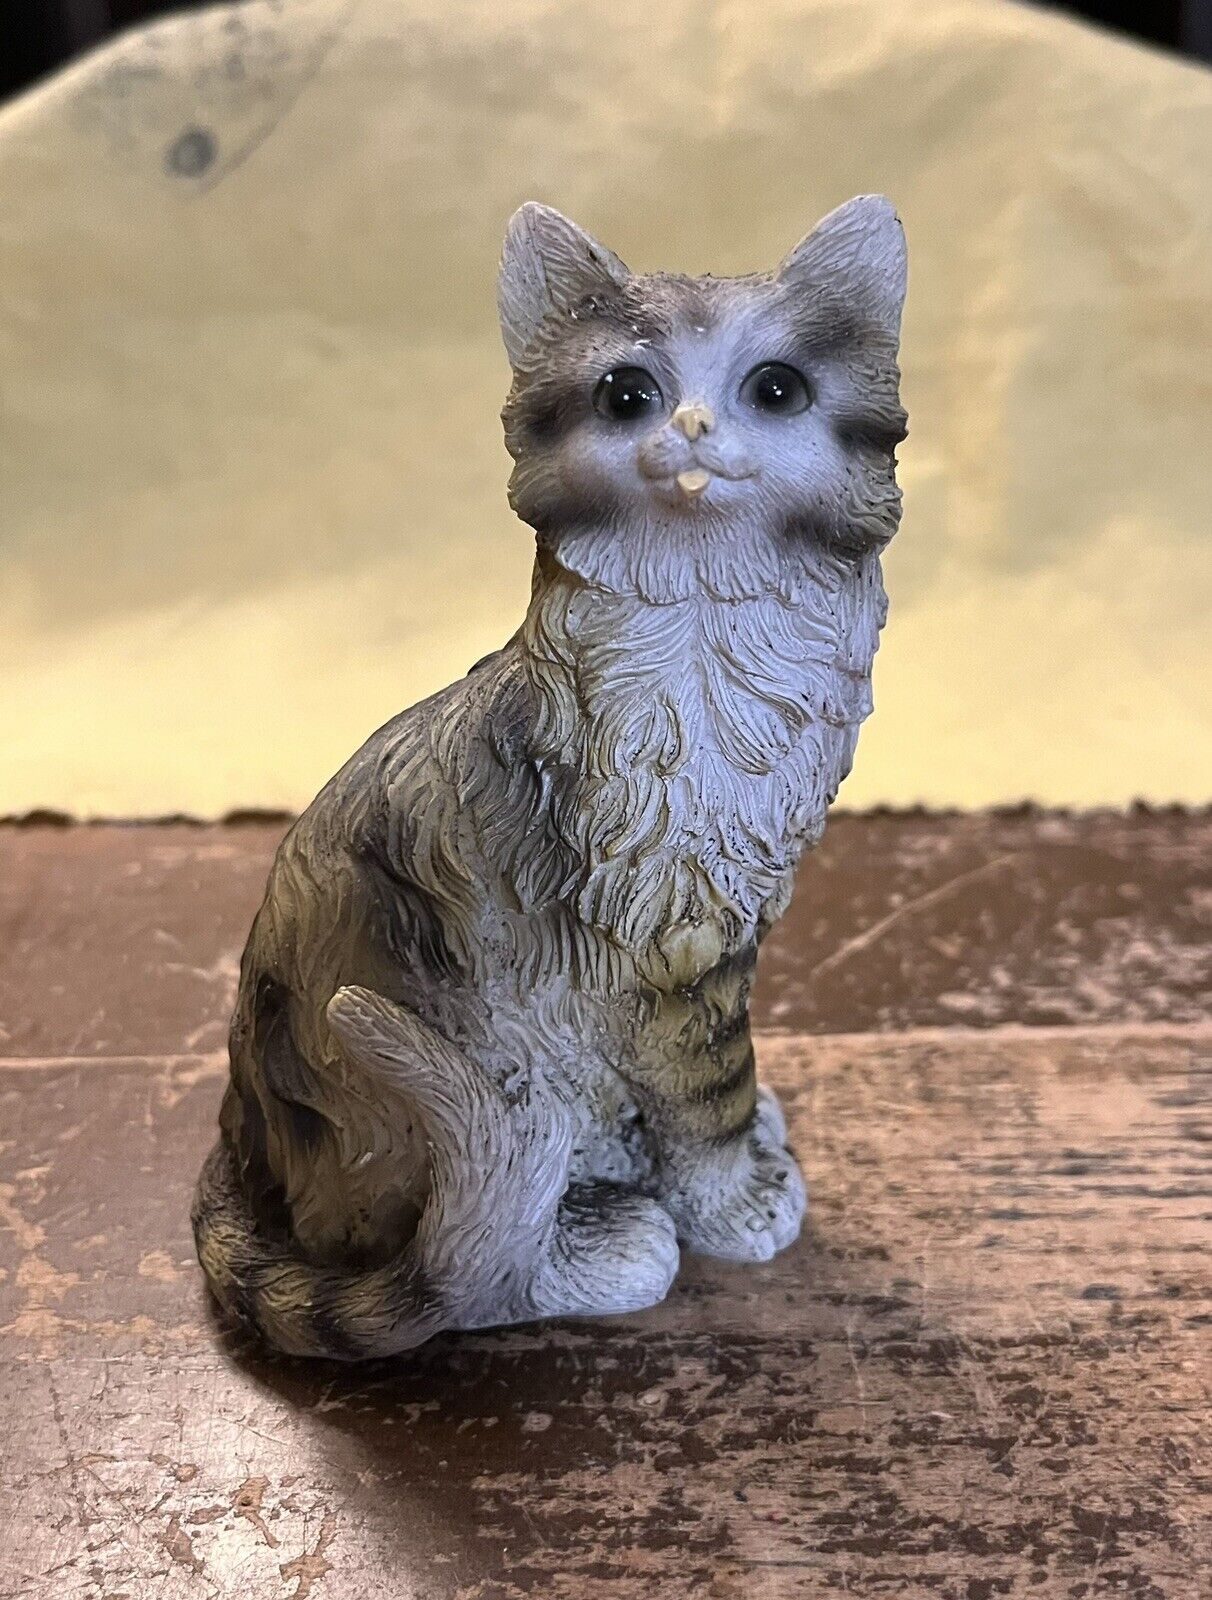 4,5” Cat Sticking Out Tongue Figurine